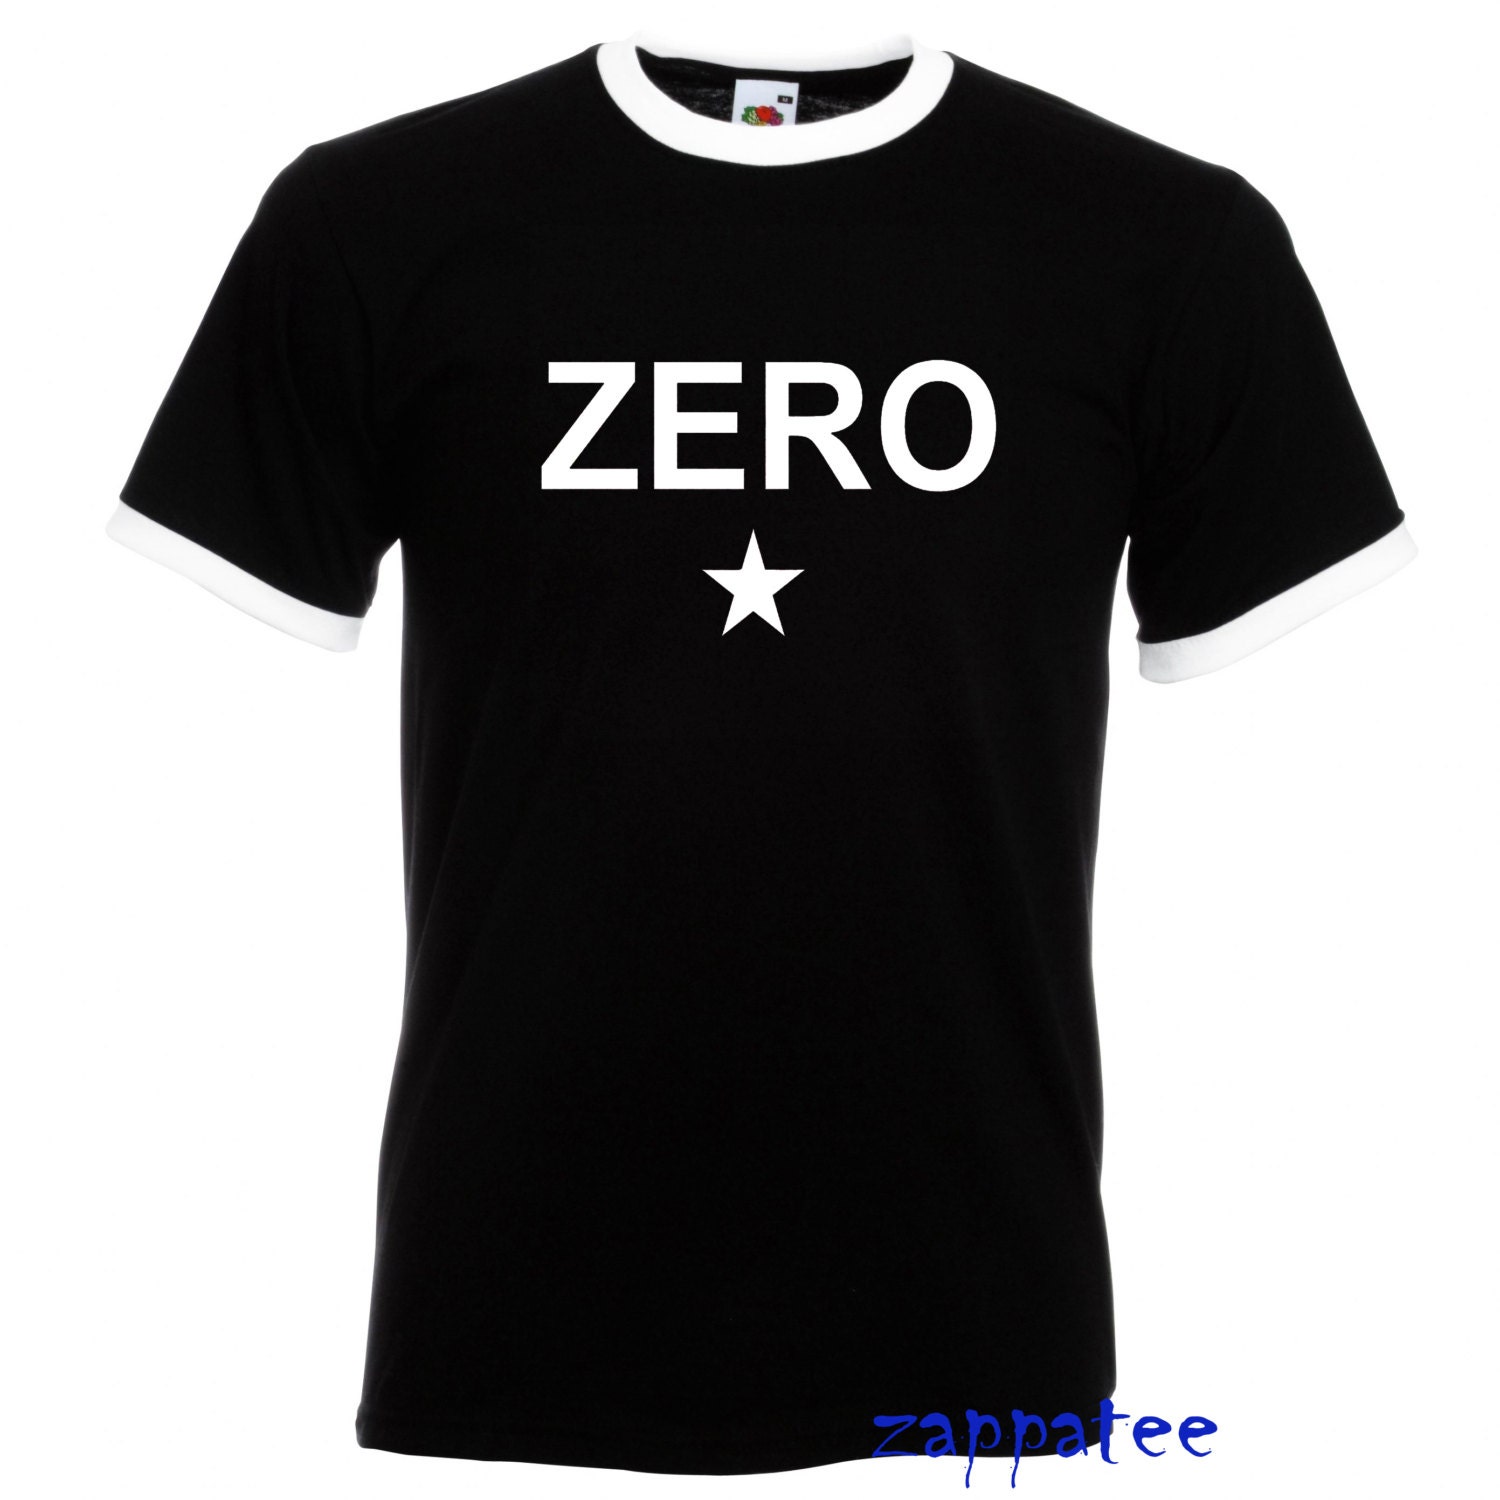 Loom the edition of shirts fruit t zero